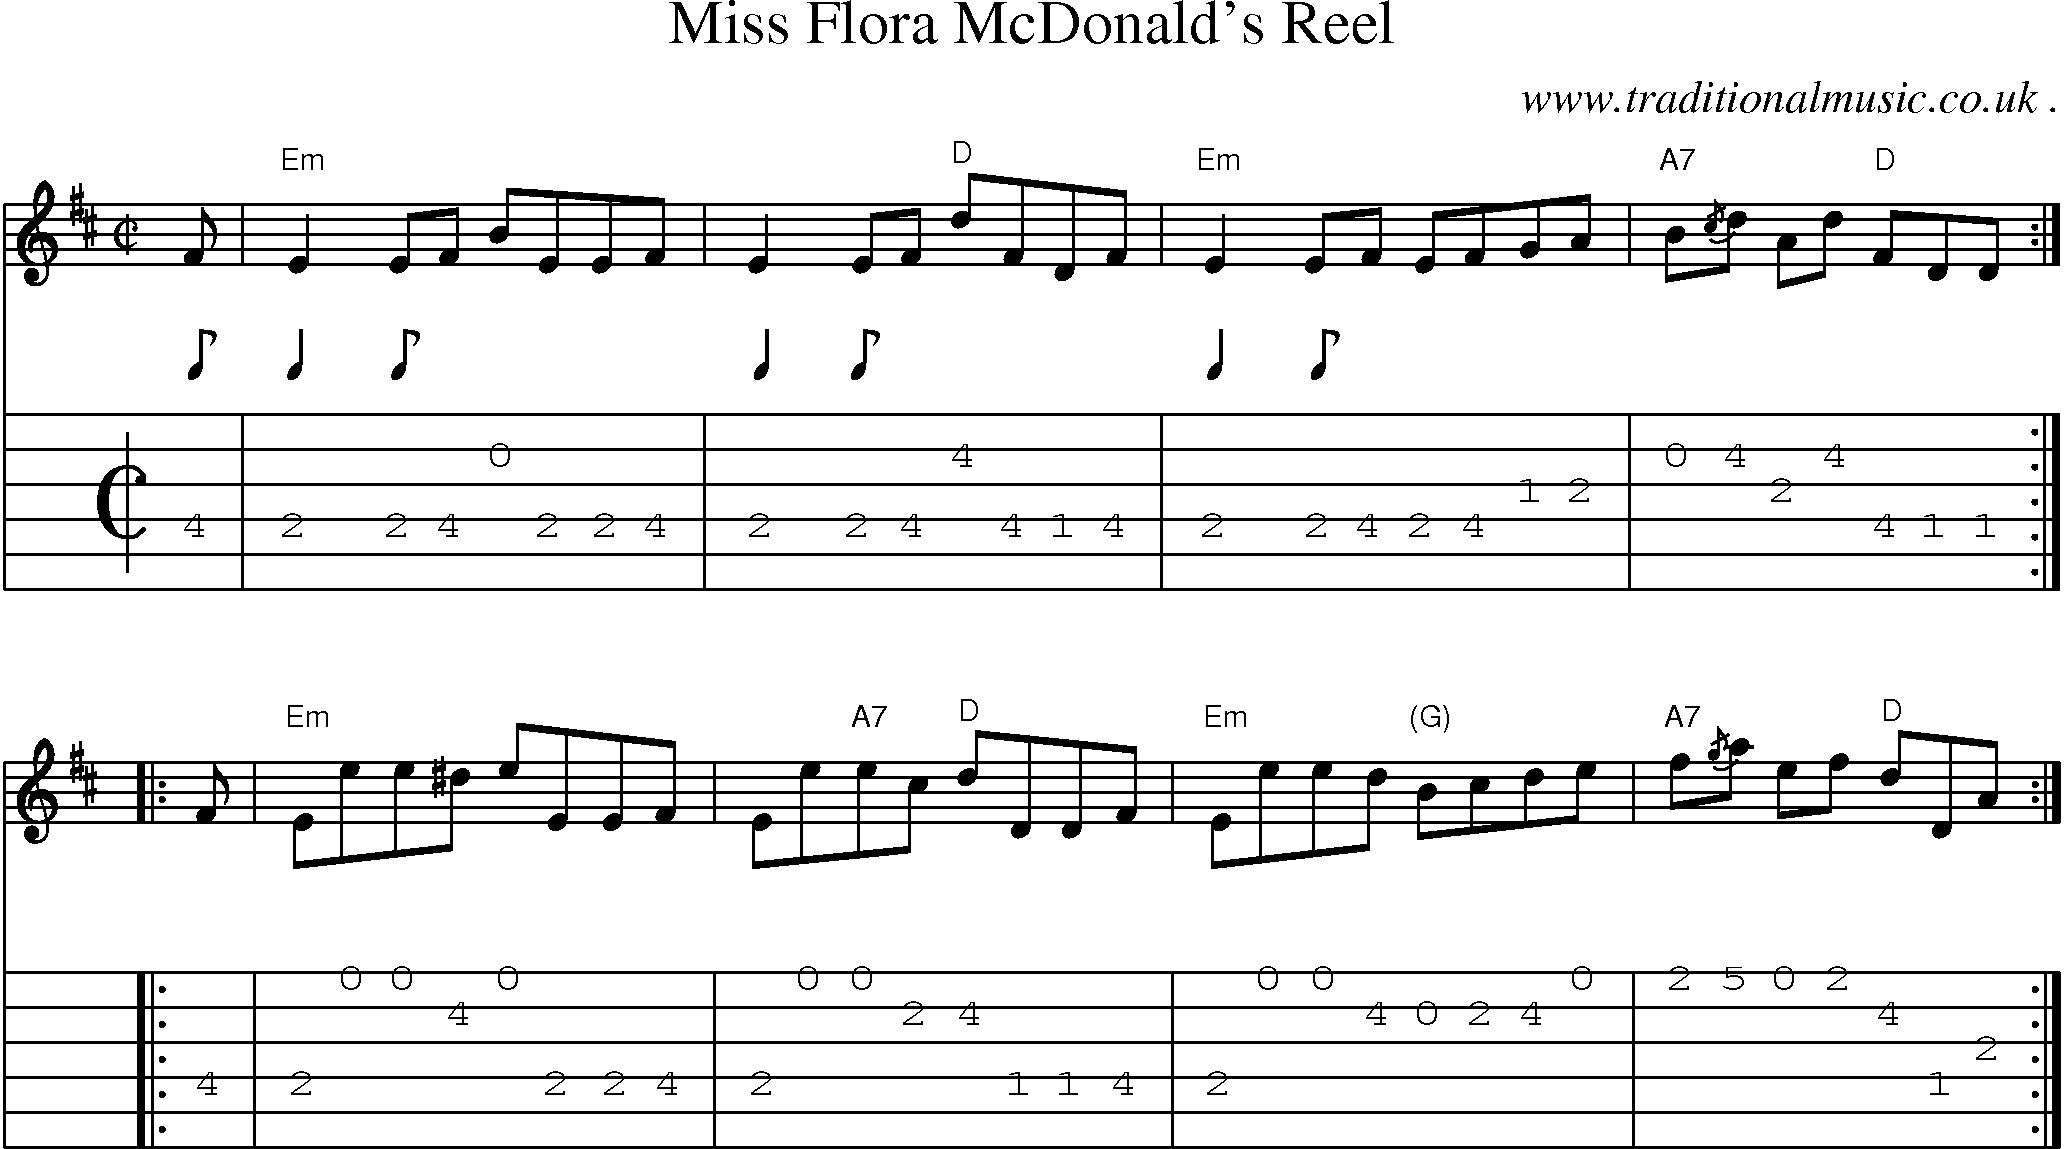 Sheet-music  score, Chords and Guitar Tabs for Miss Flora Mcdonalds Reel